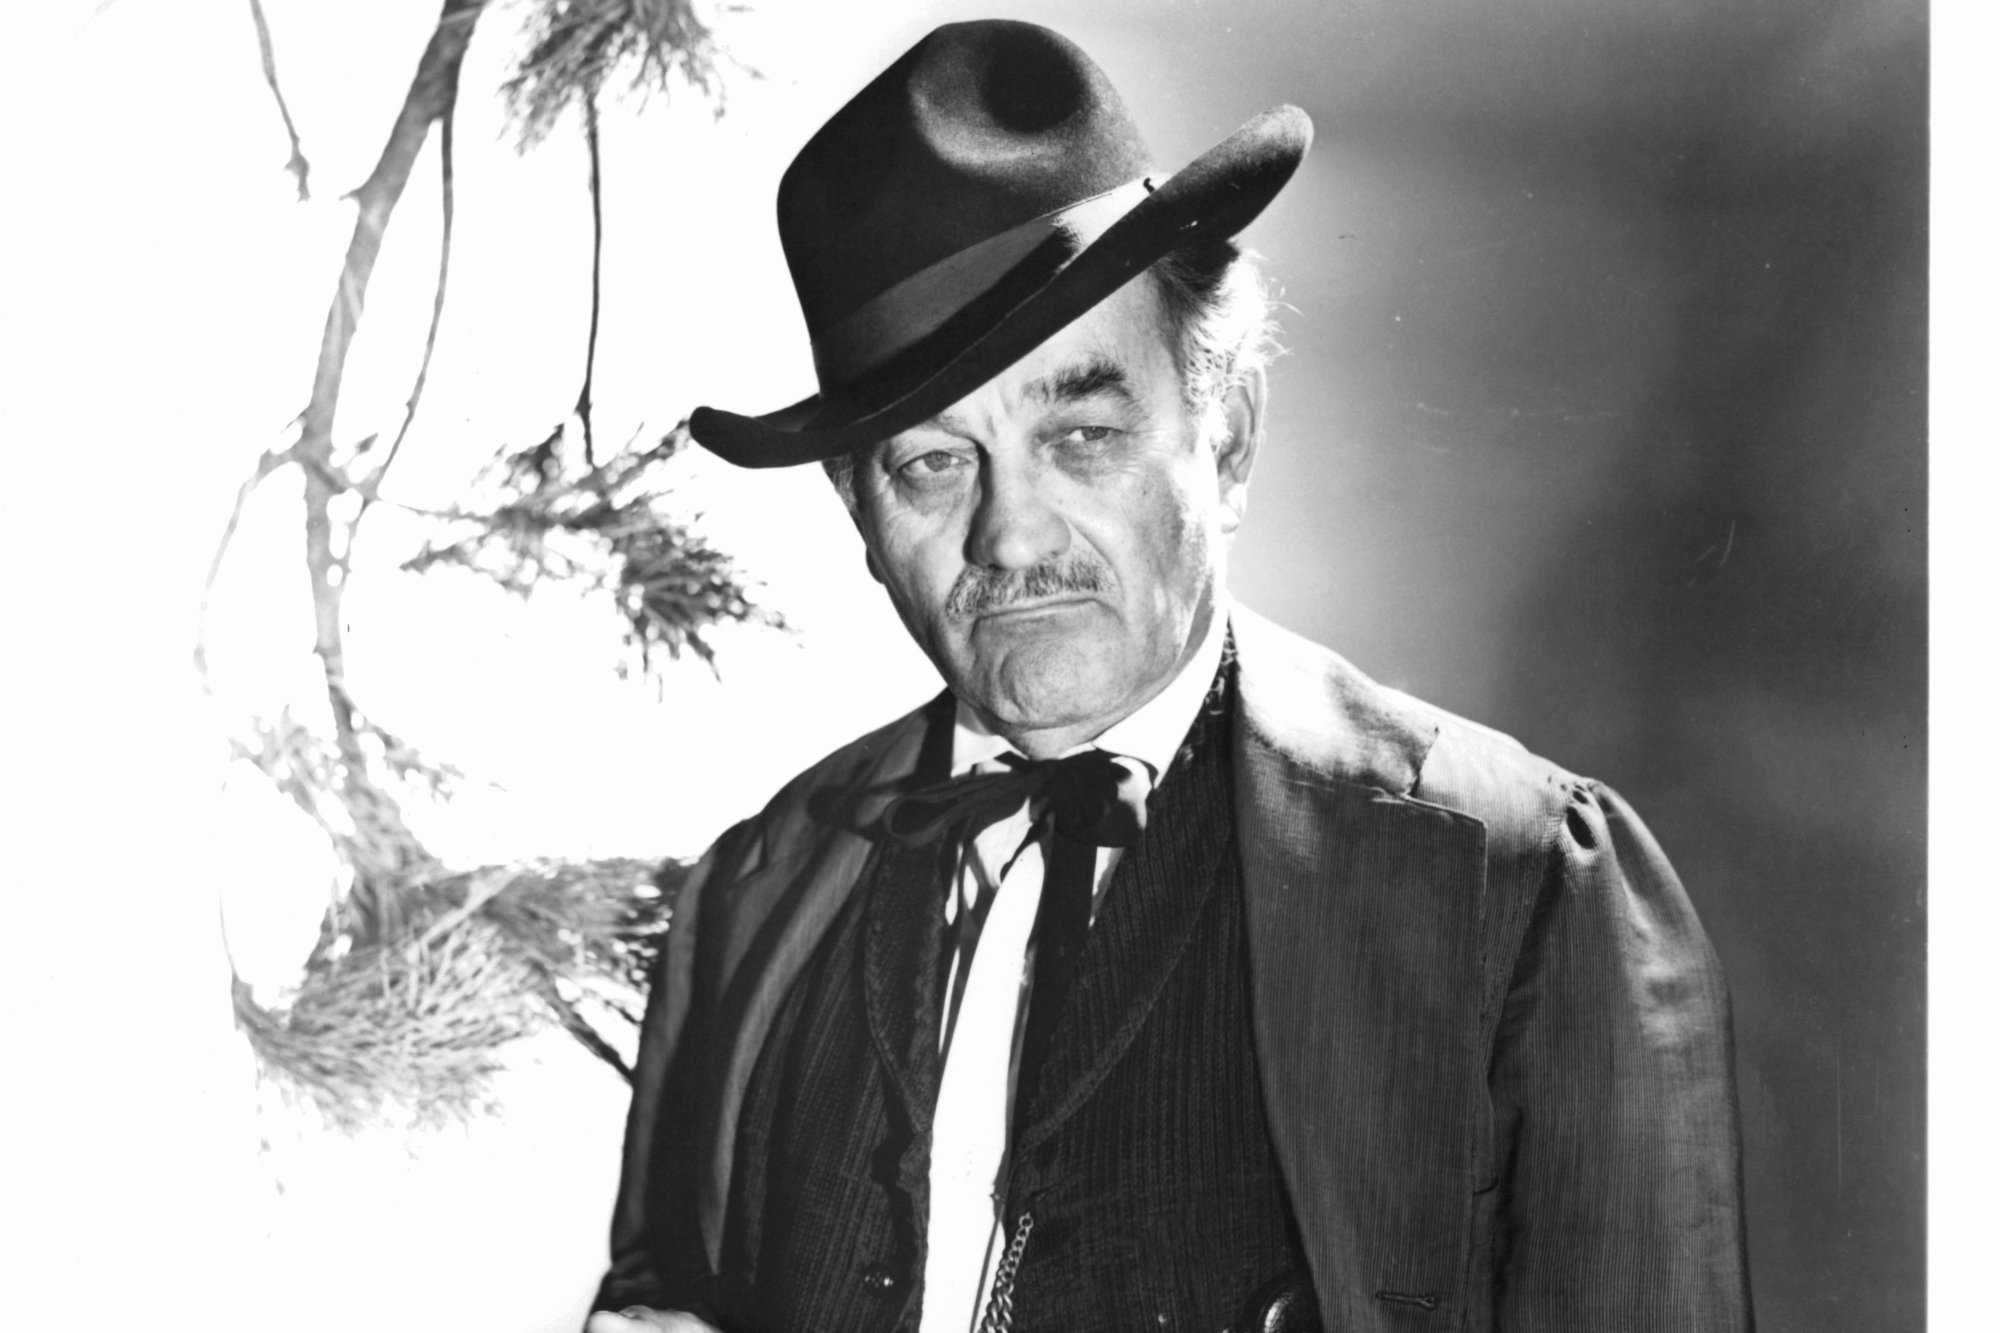 'Gunsmoke' actor Milburn Stone in a black-and-white picture with a plain expression on his face wearing Western clothing